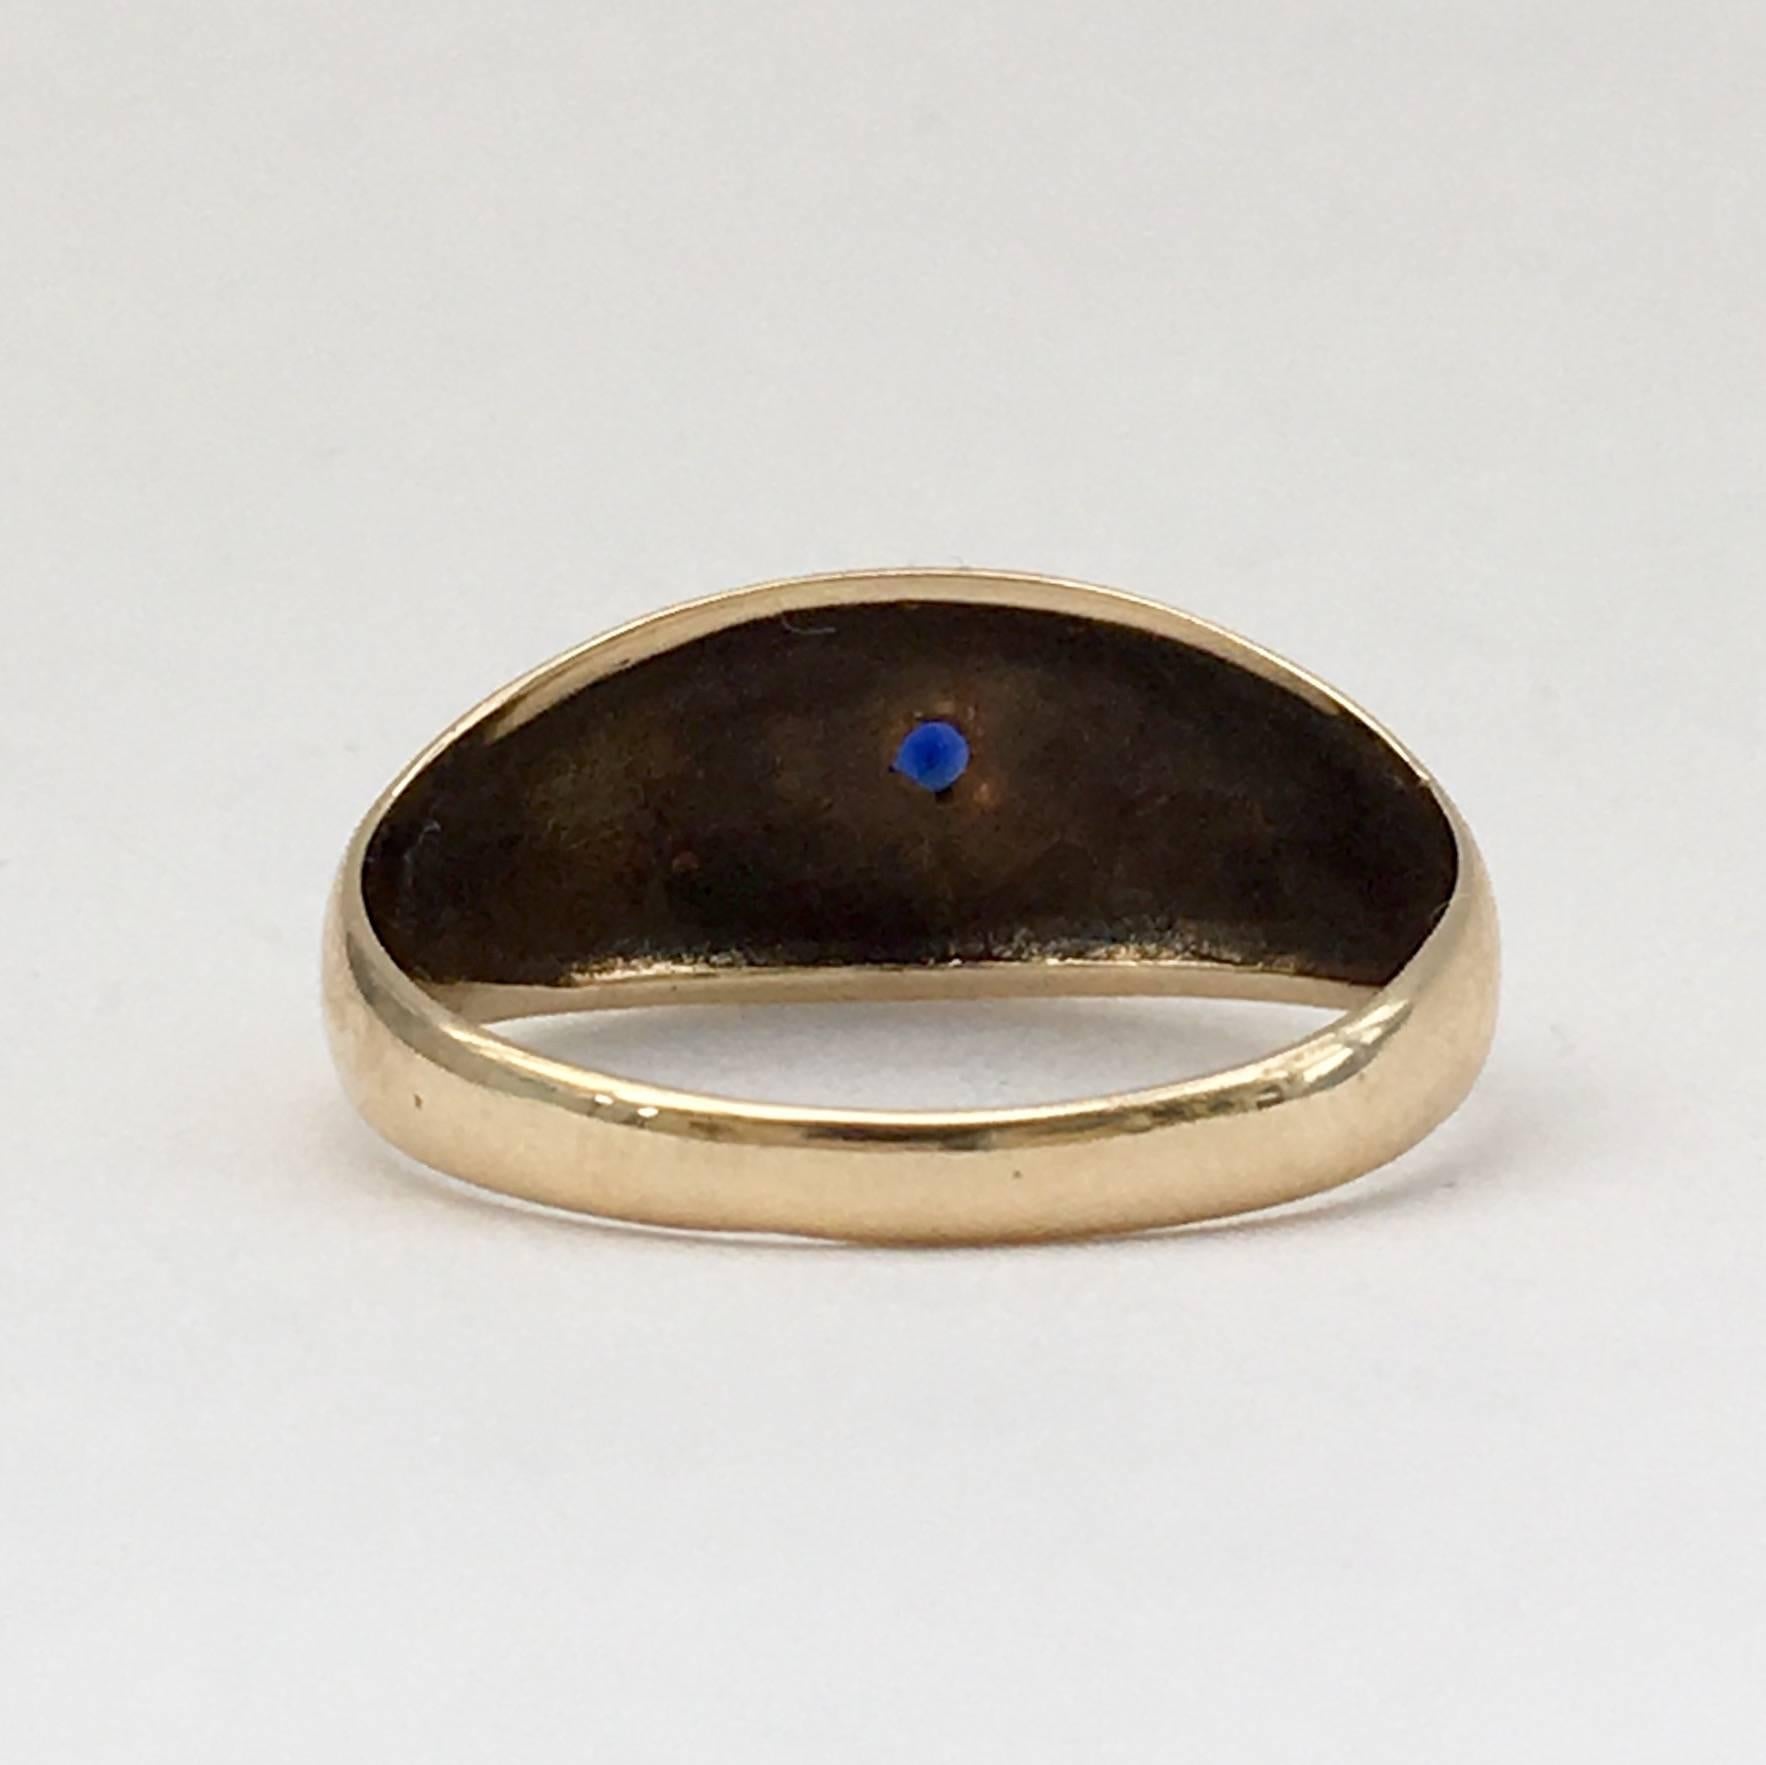 Women's or Men's Sapphire Ring 1960s Vintage Jewelry Gypsy Set Star Gold Signet Band Midcentury 